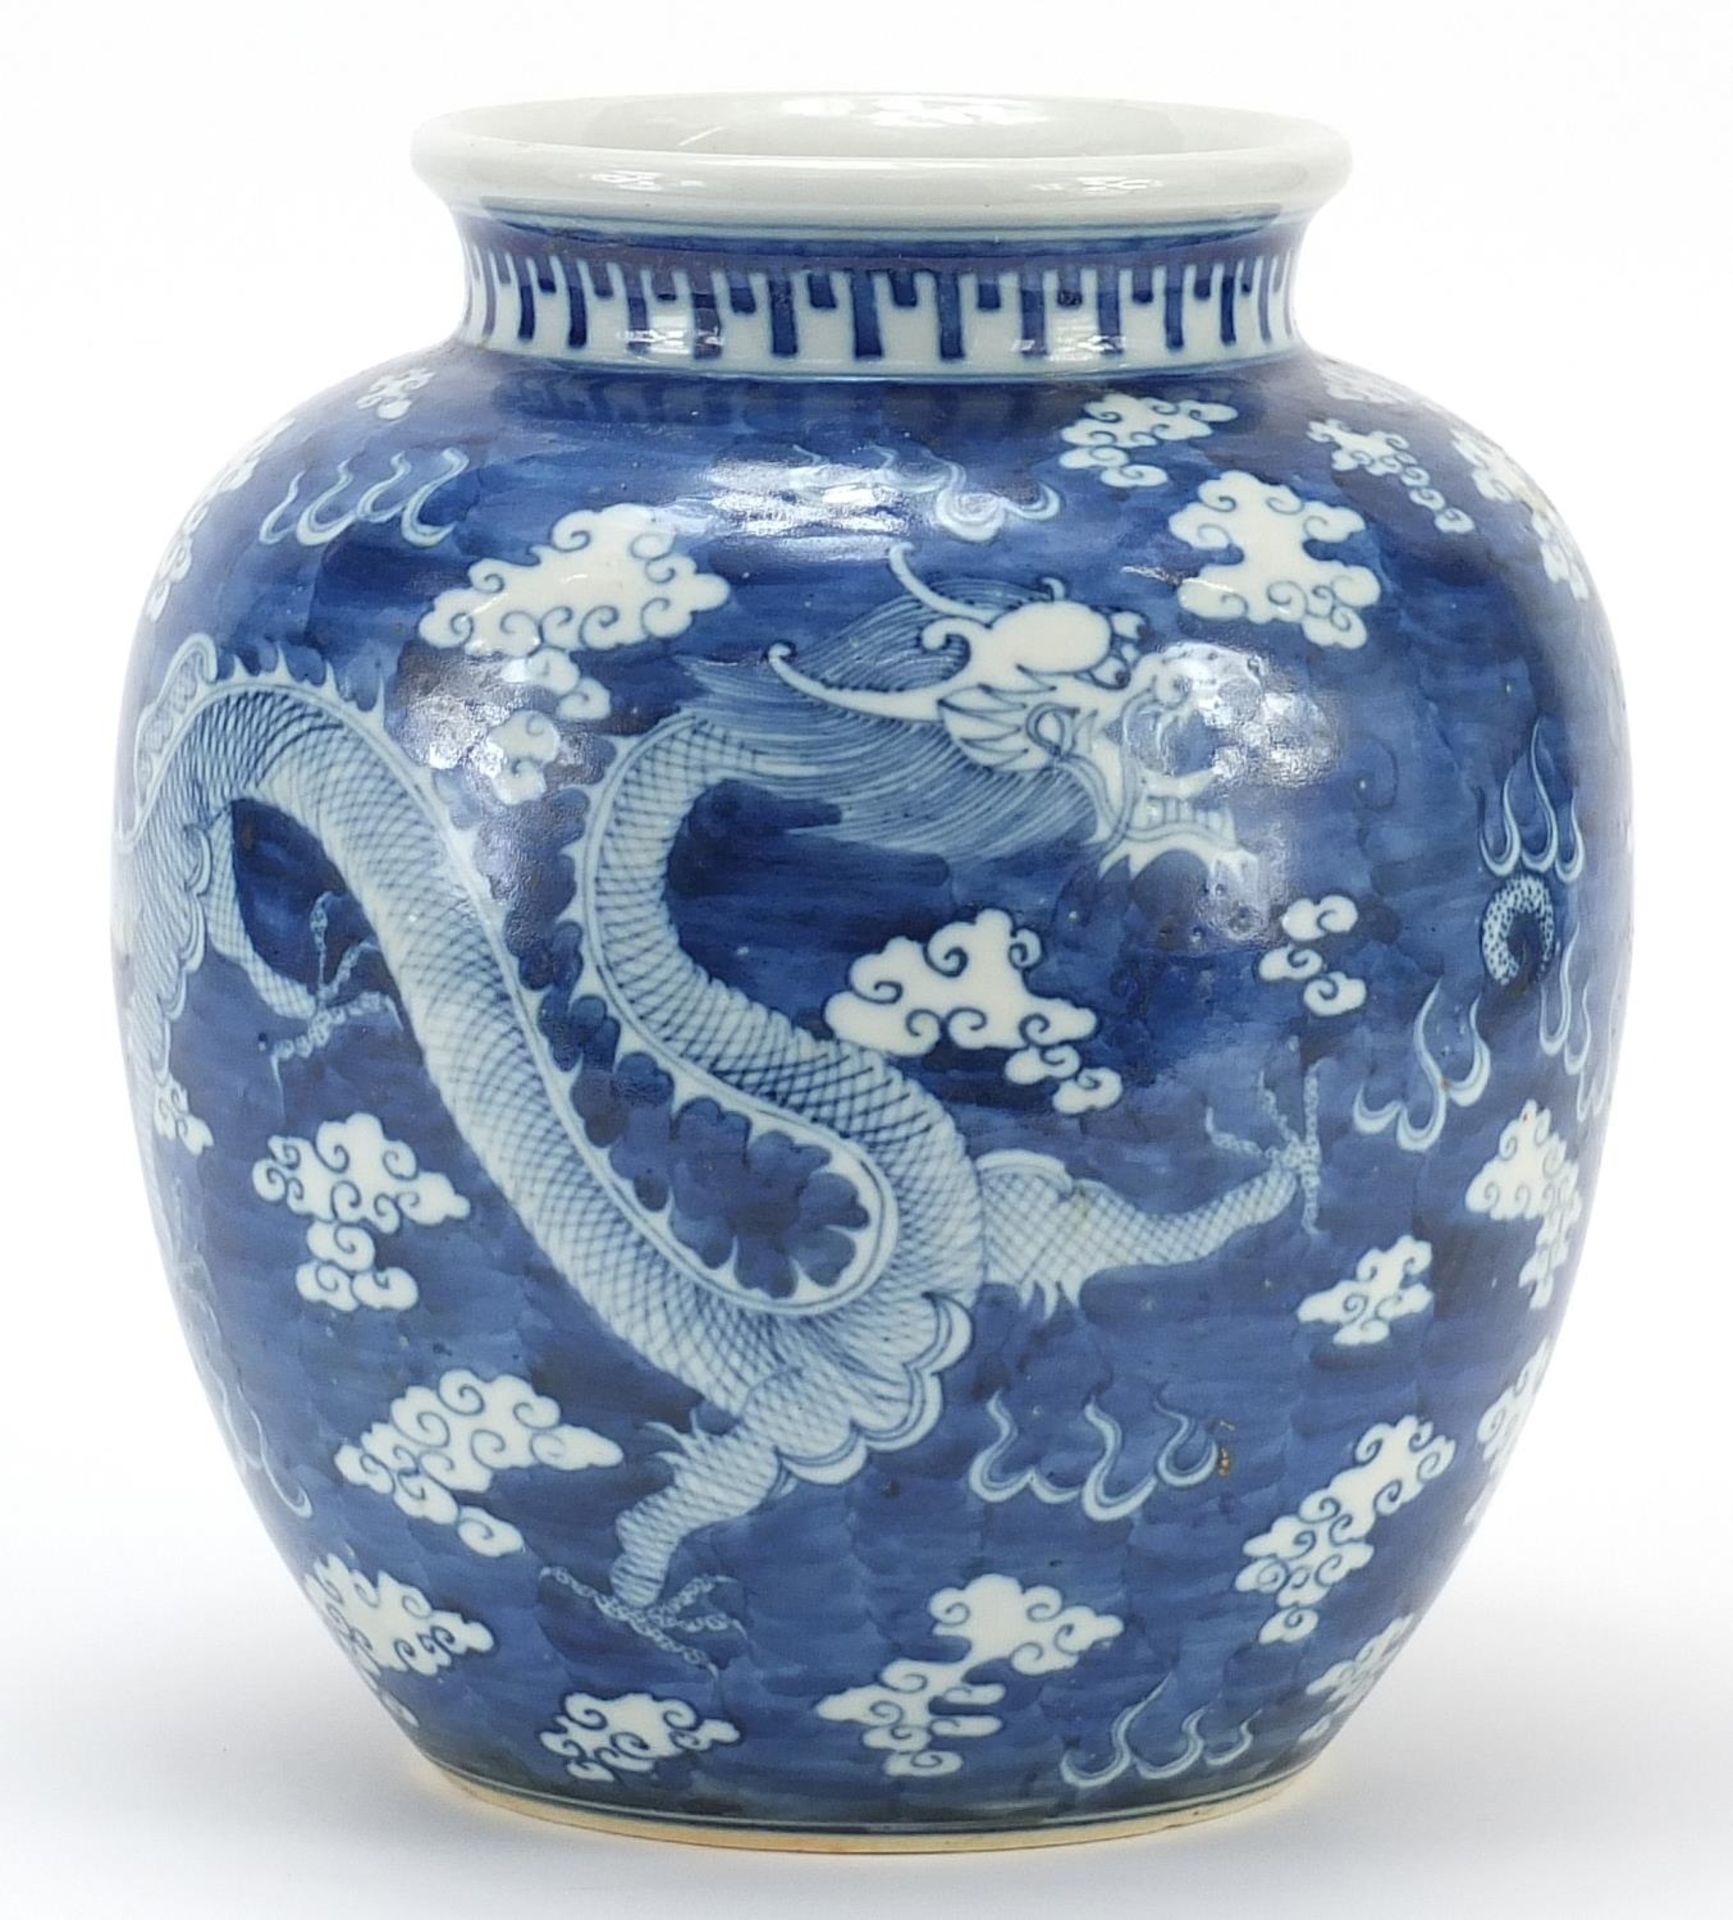 Chinese blue and white porcelain vase hand painted with dragons chasing a flaming pearl amongst